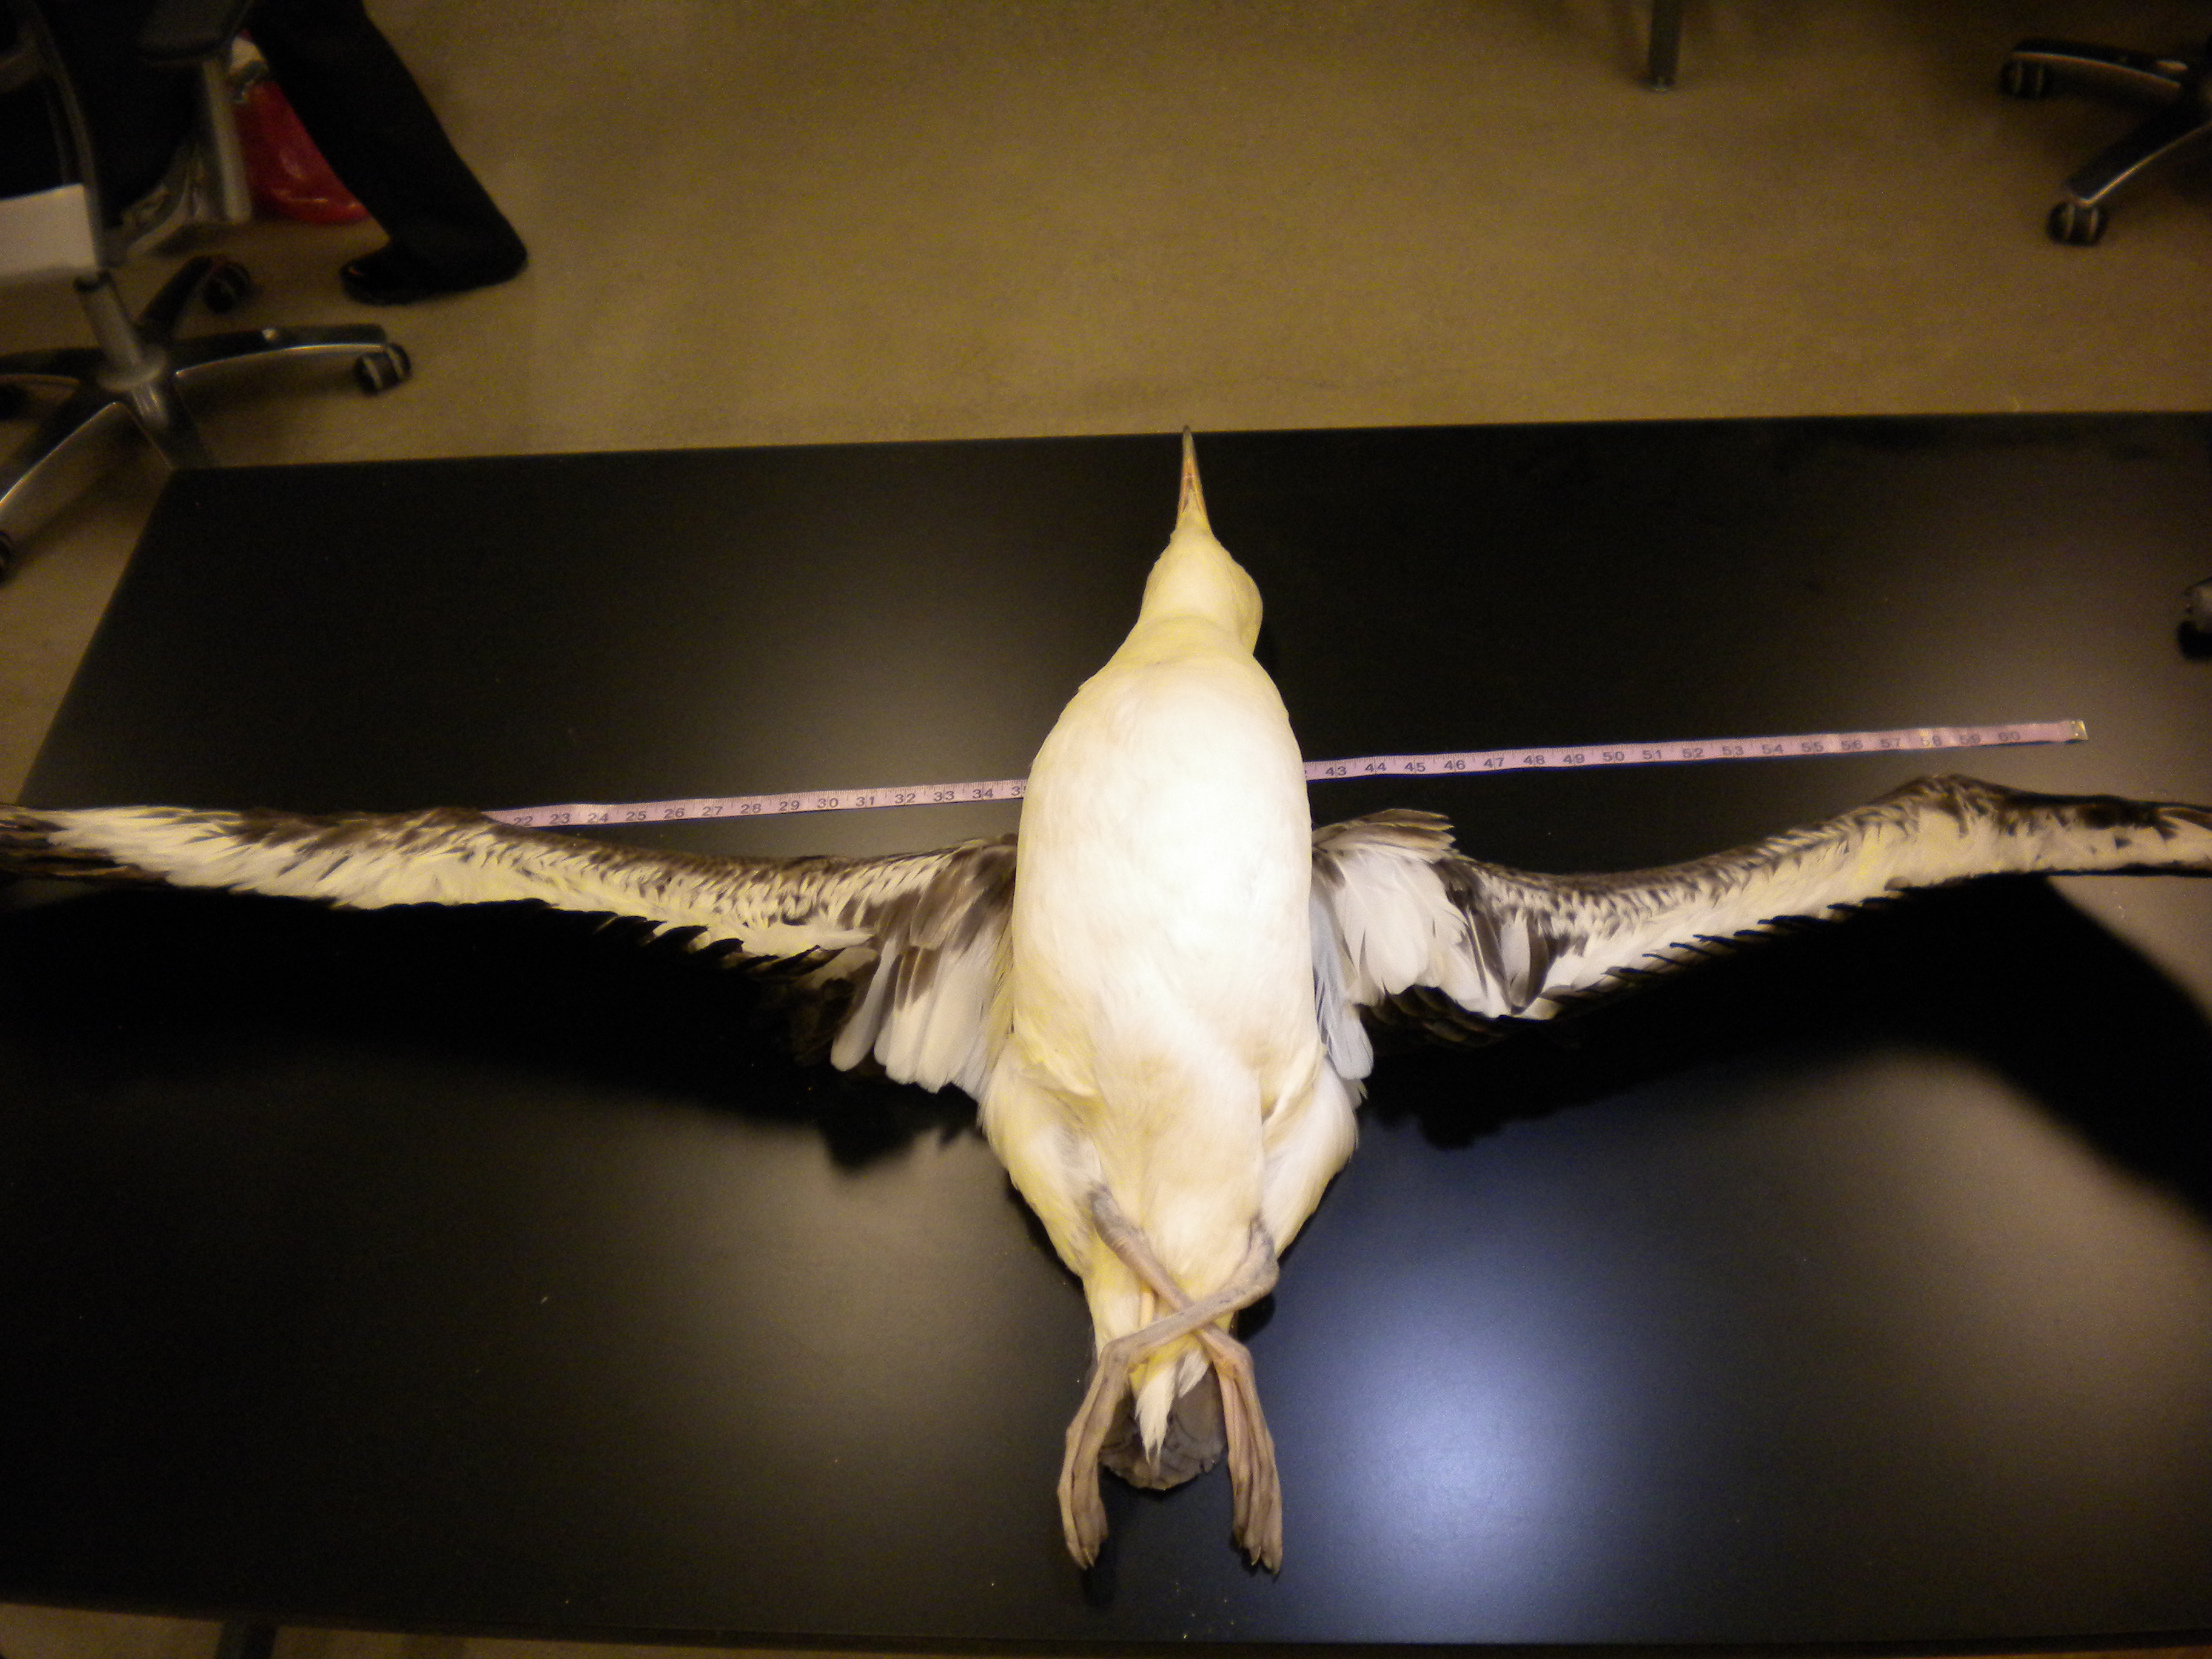 This Laysan Albatross has a wingspan of 6 feet and 7 inches.